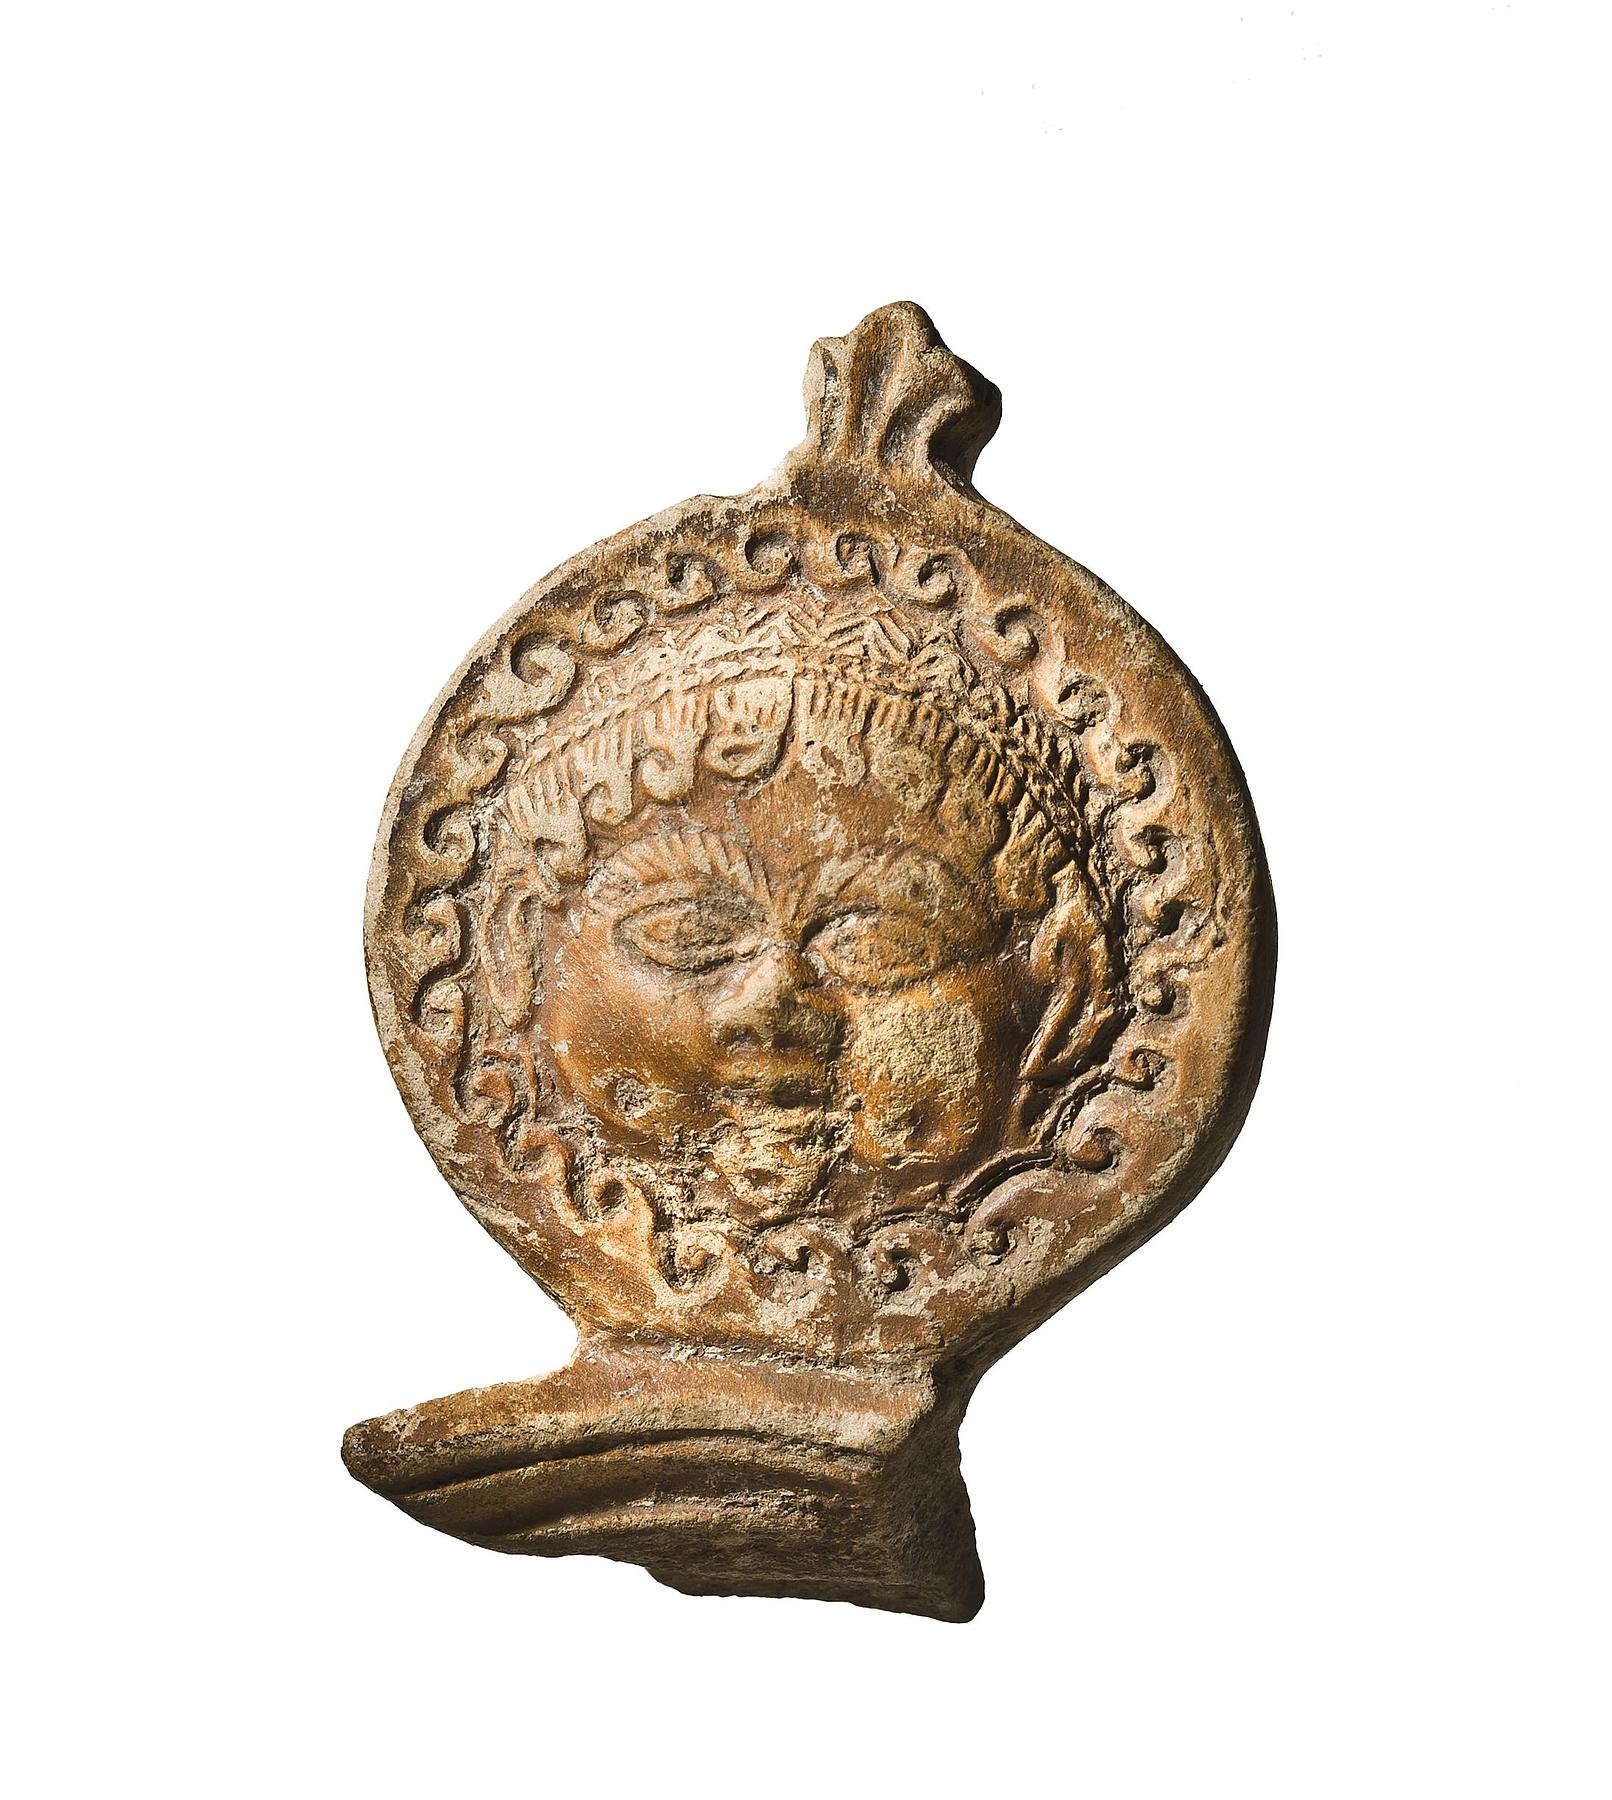 Lamp handle with a gorgo mask and palmette leaf, H1238